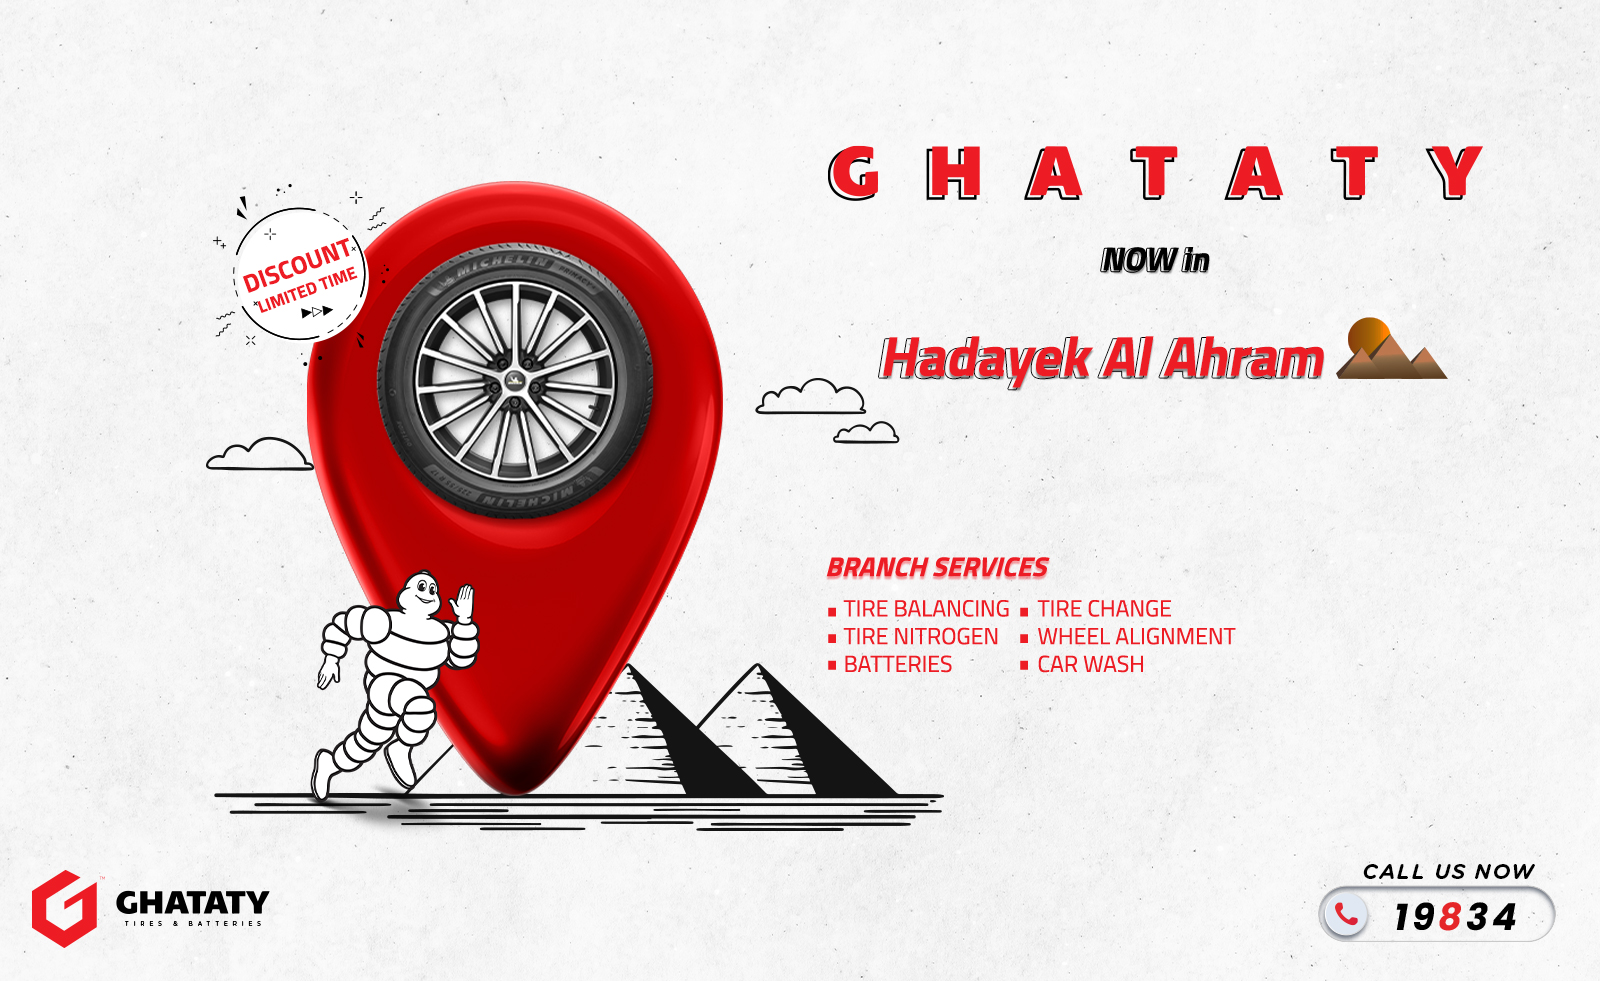 Hadayek El Ahram 2 a new branch for Ghataty is live now